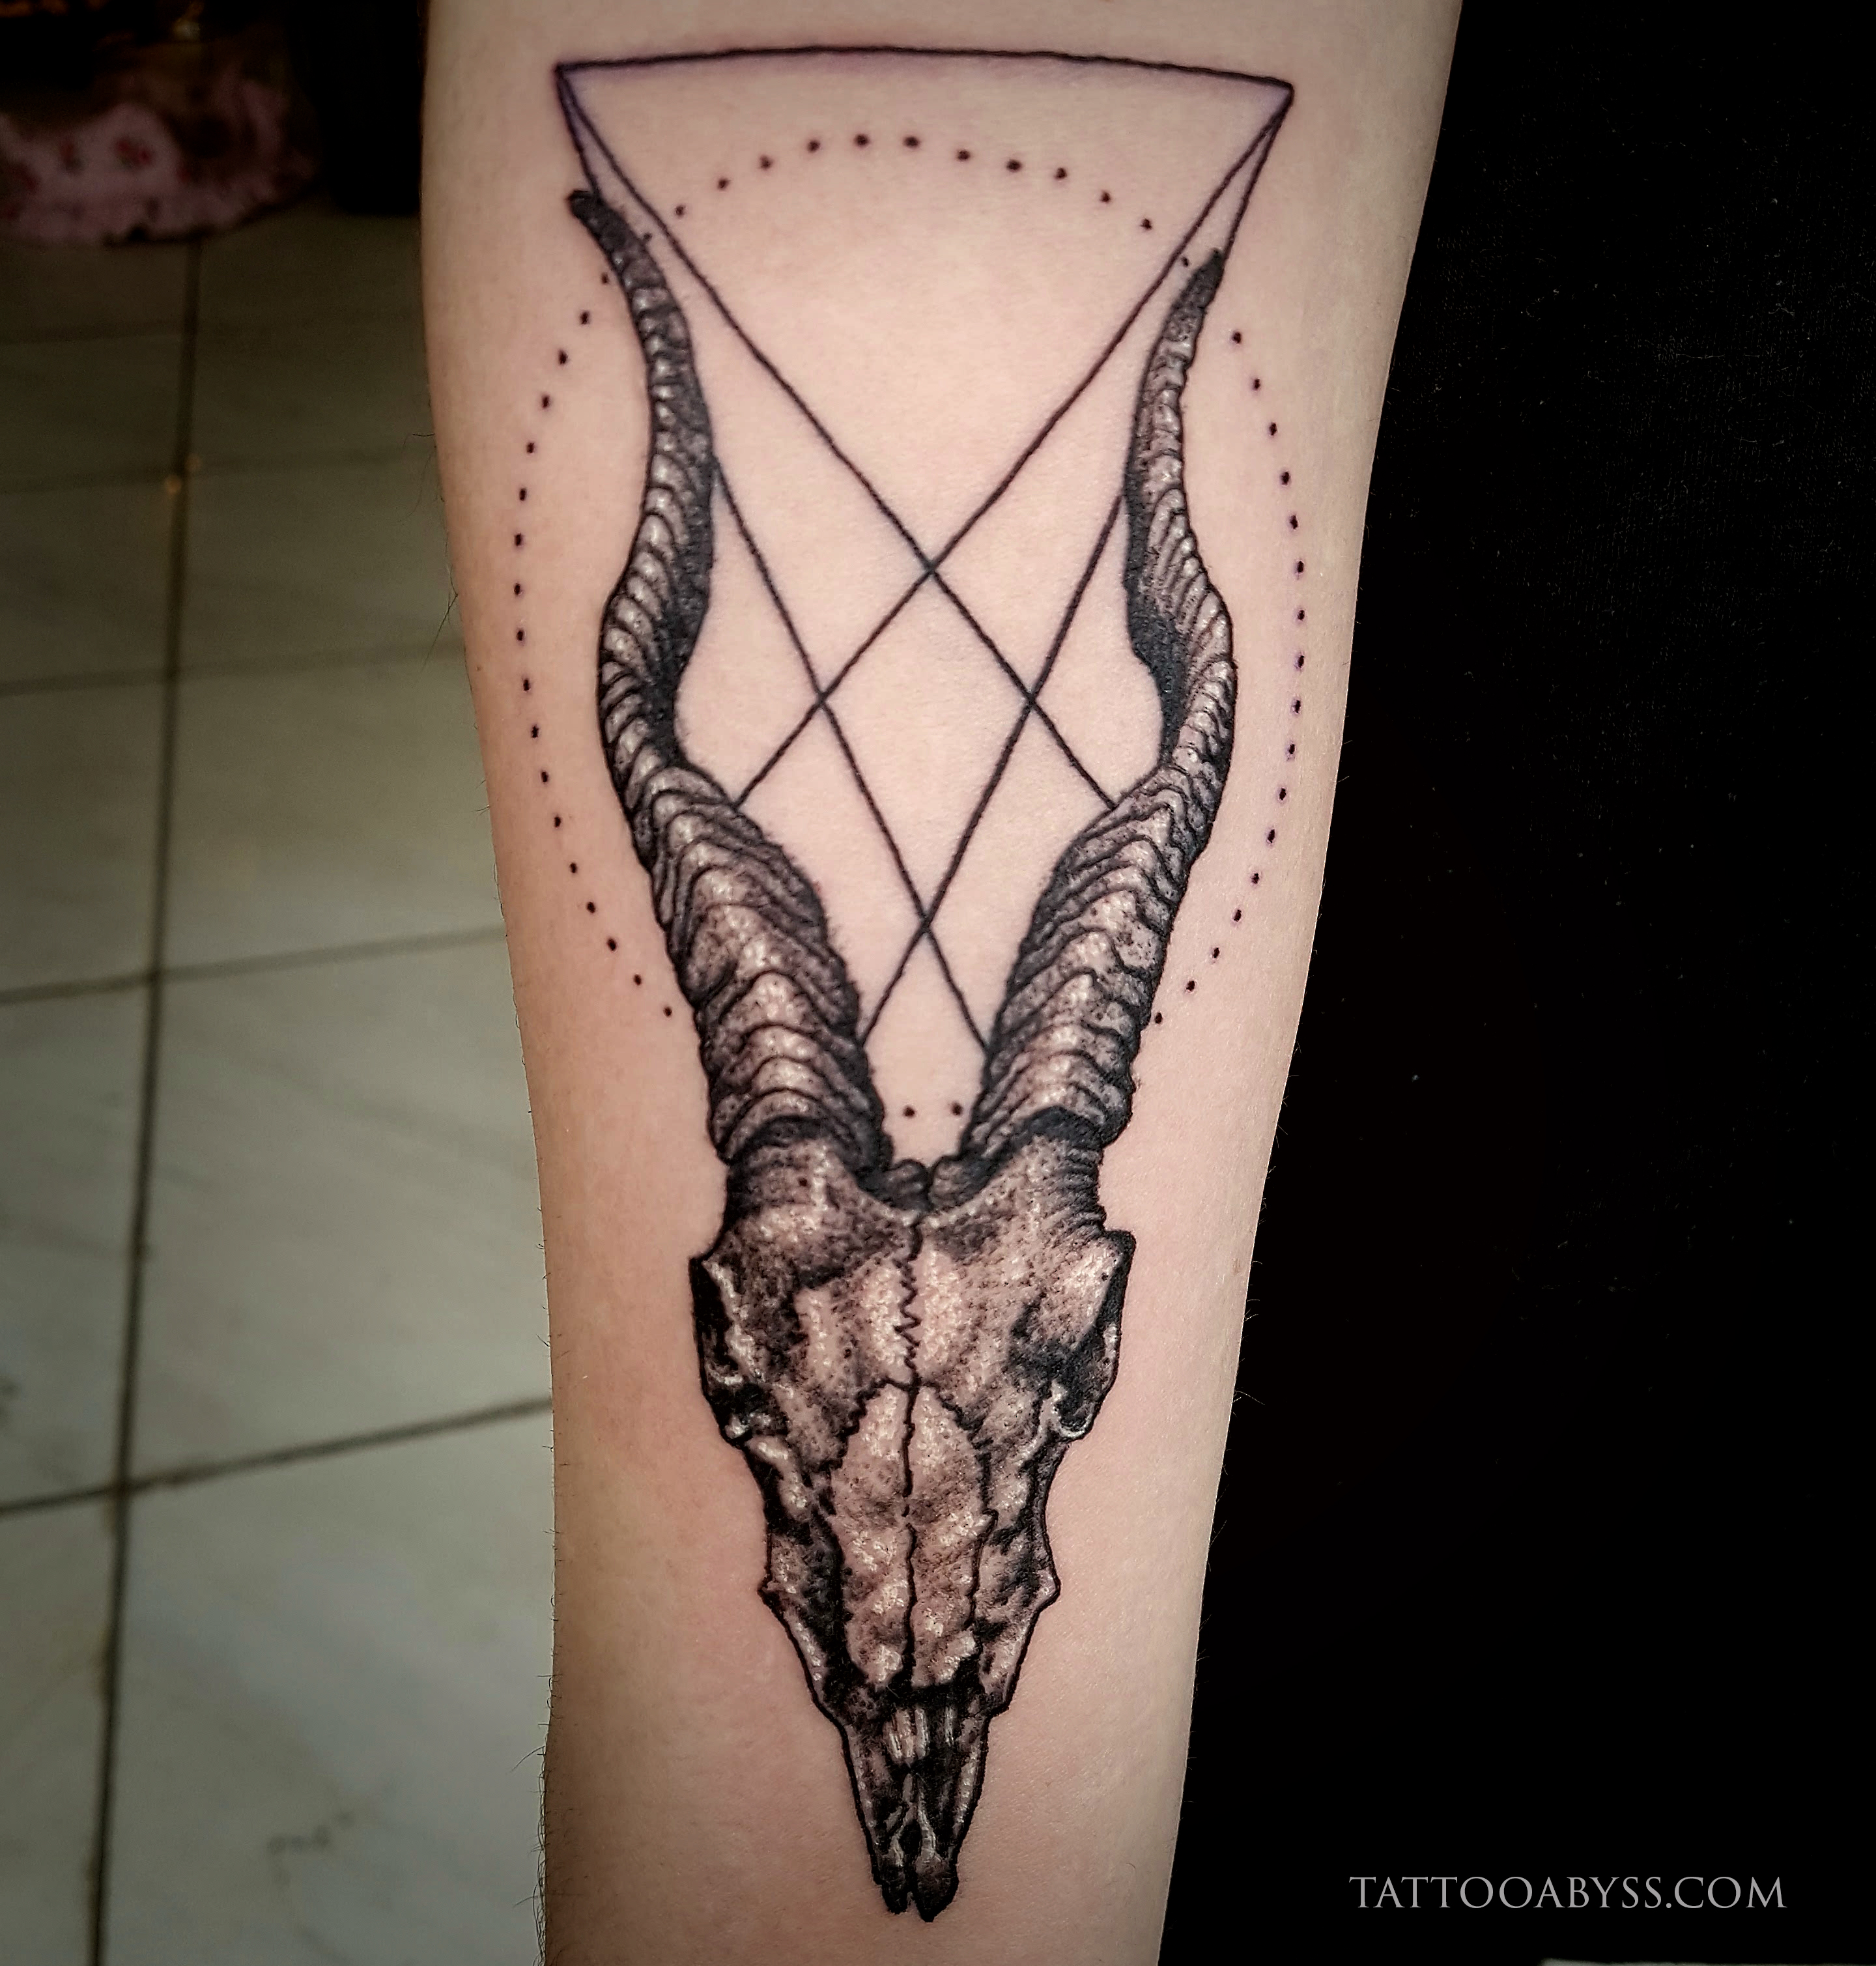 Goat Skull - Tattoo Abyss Montreal